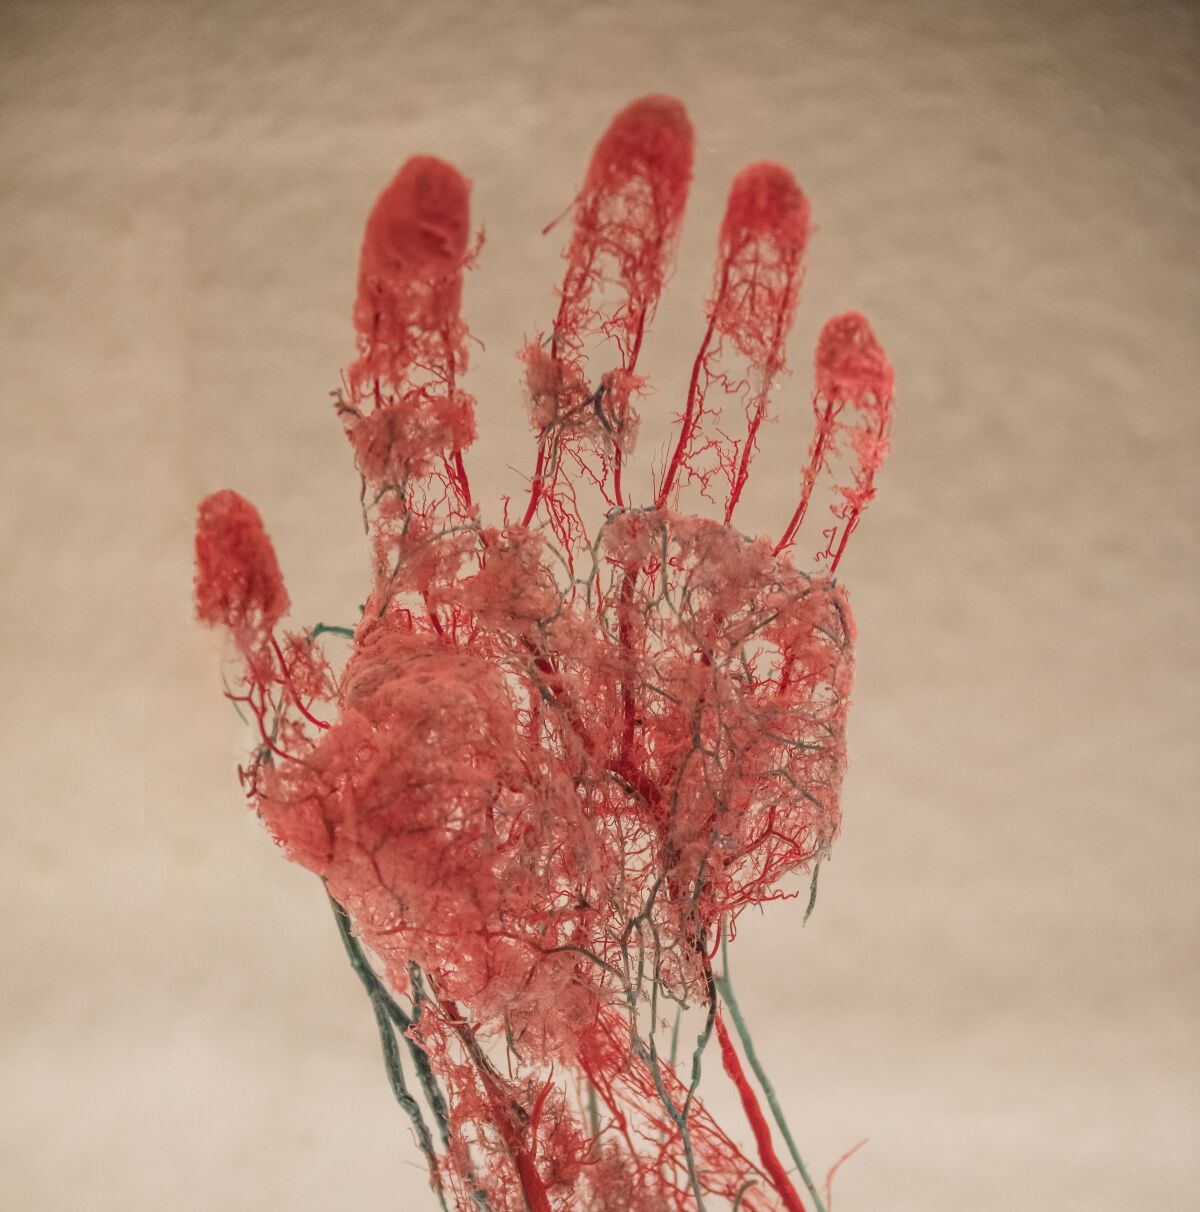 Blood Vessels of human hand